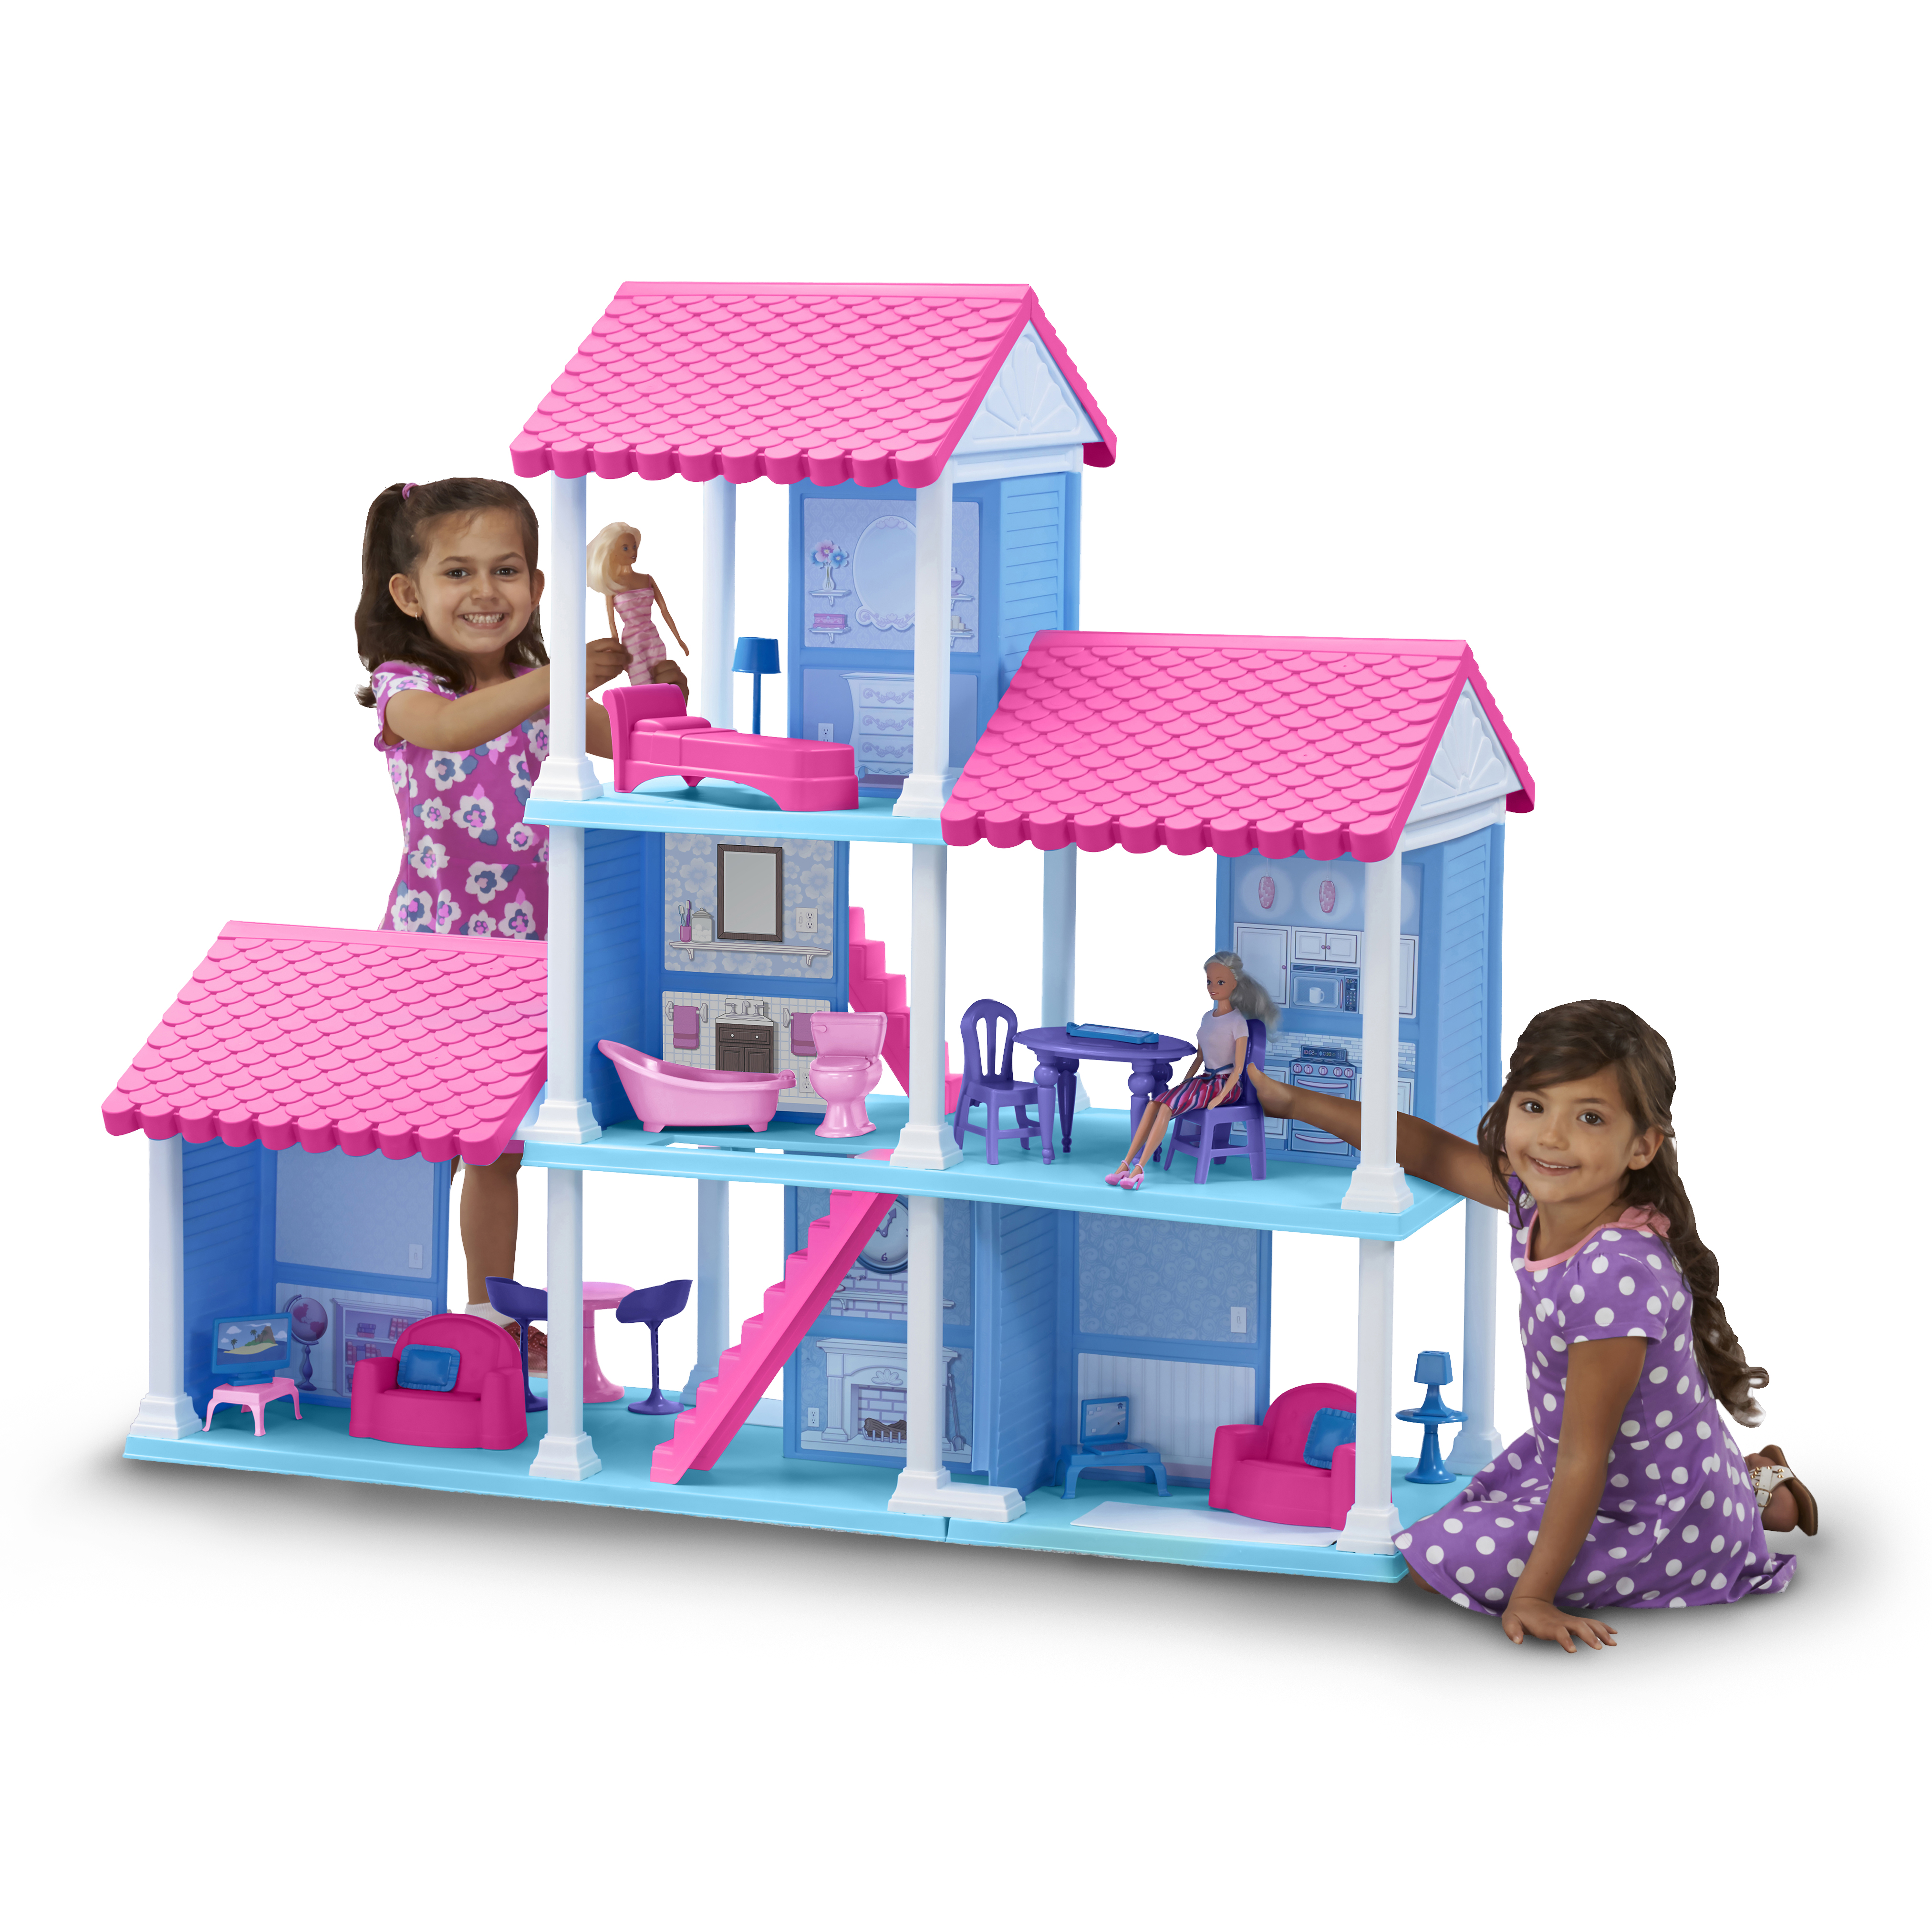 3 story dollhouse with furniture